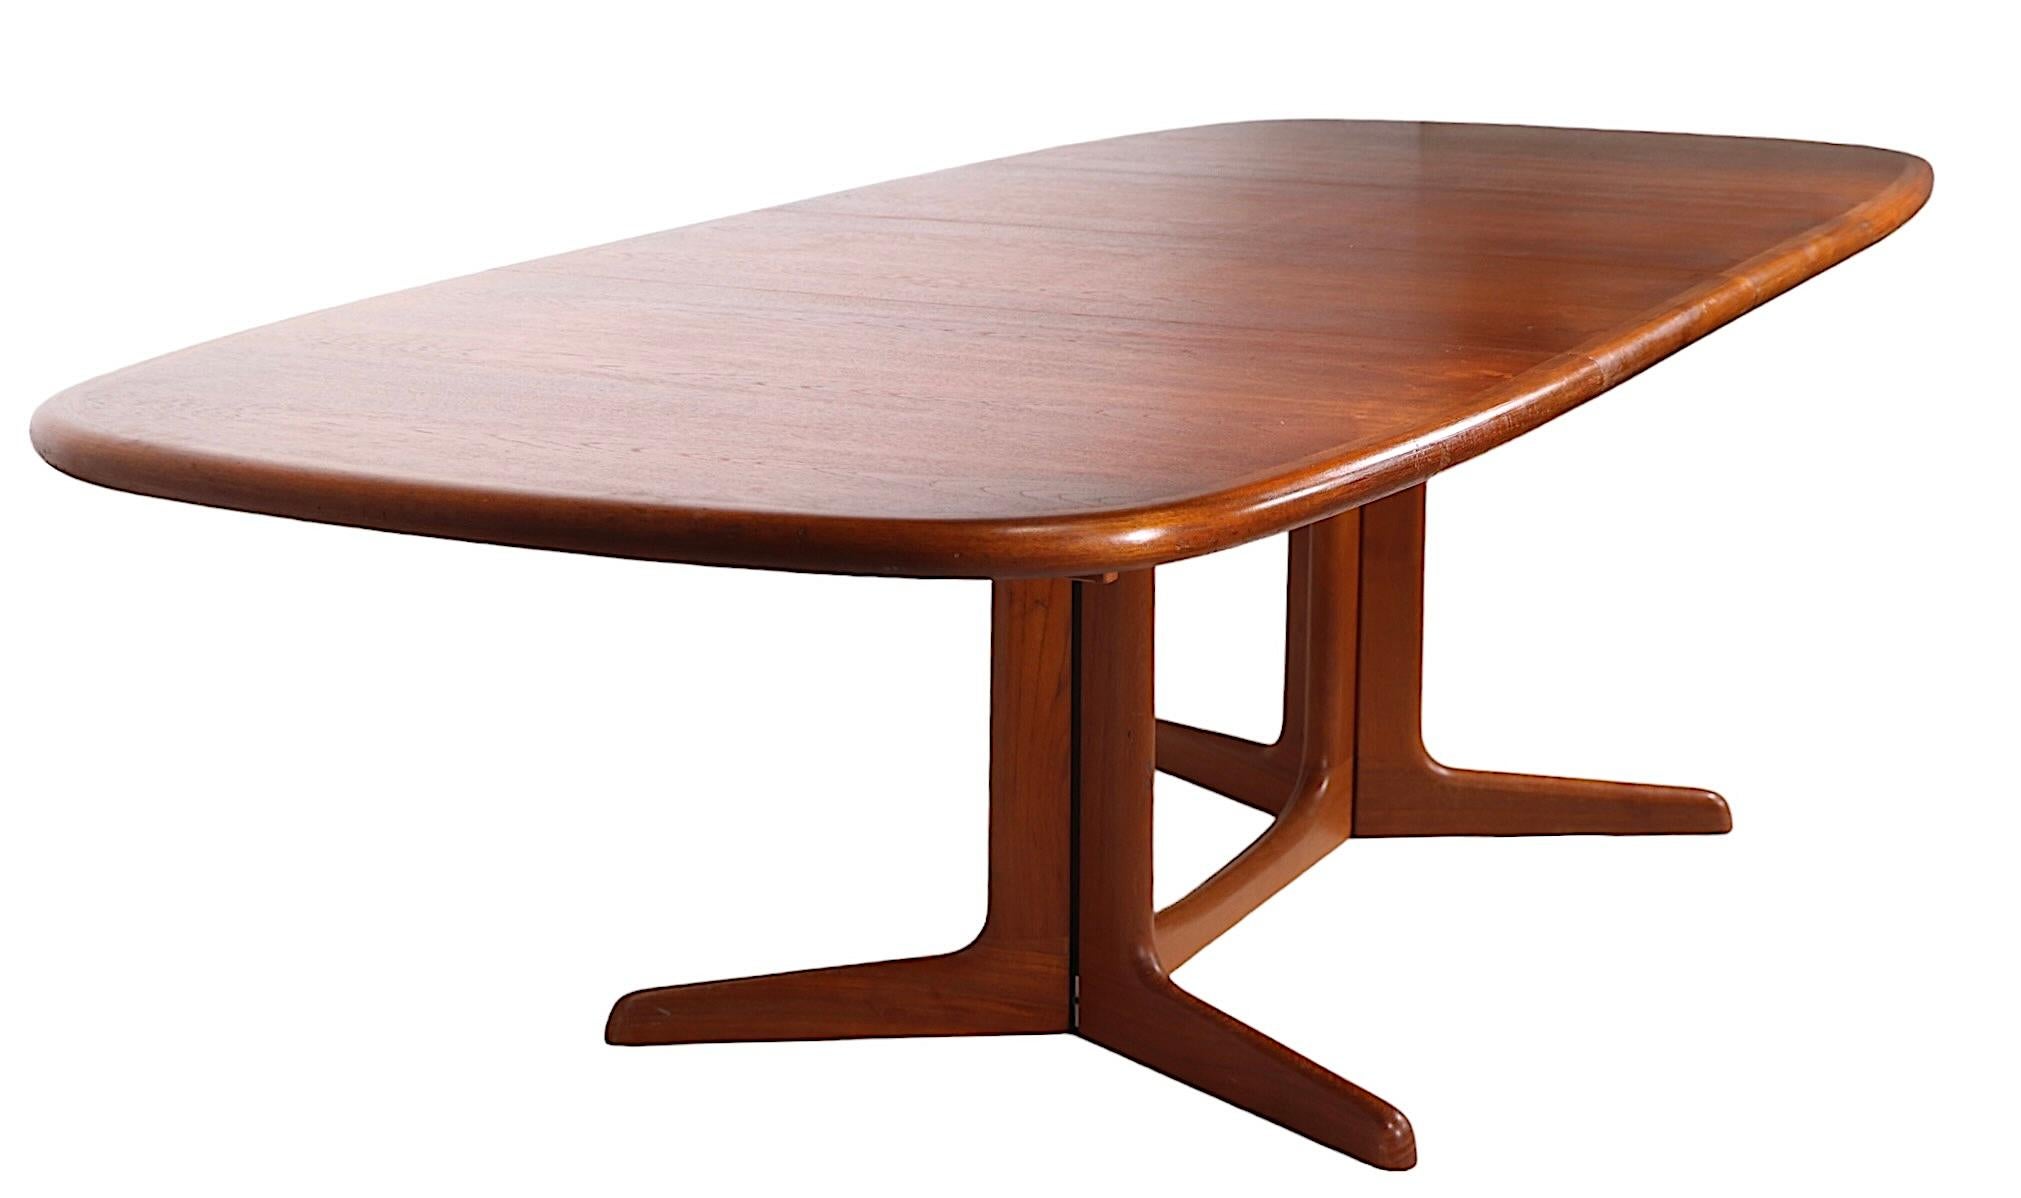 Danish Mid Century Oval Teak Dining Table by Niels Otto Moller for Gudme c 1970s For Sale 12